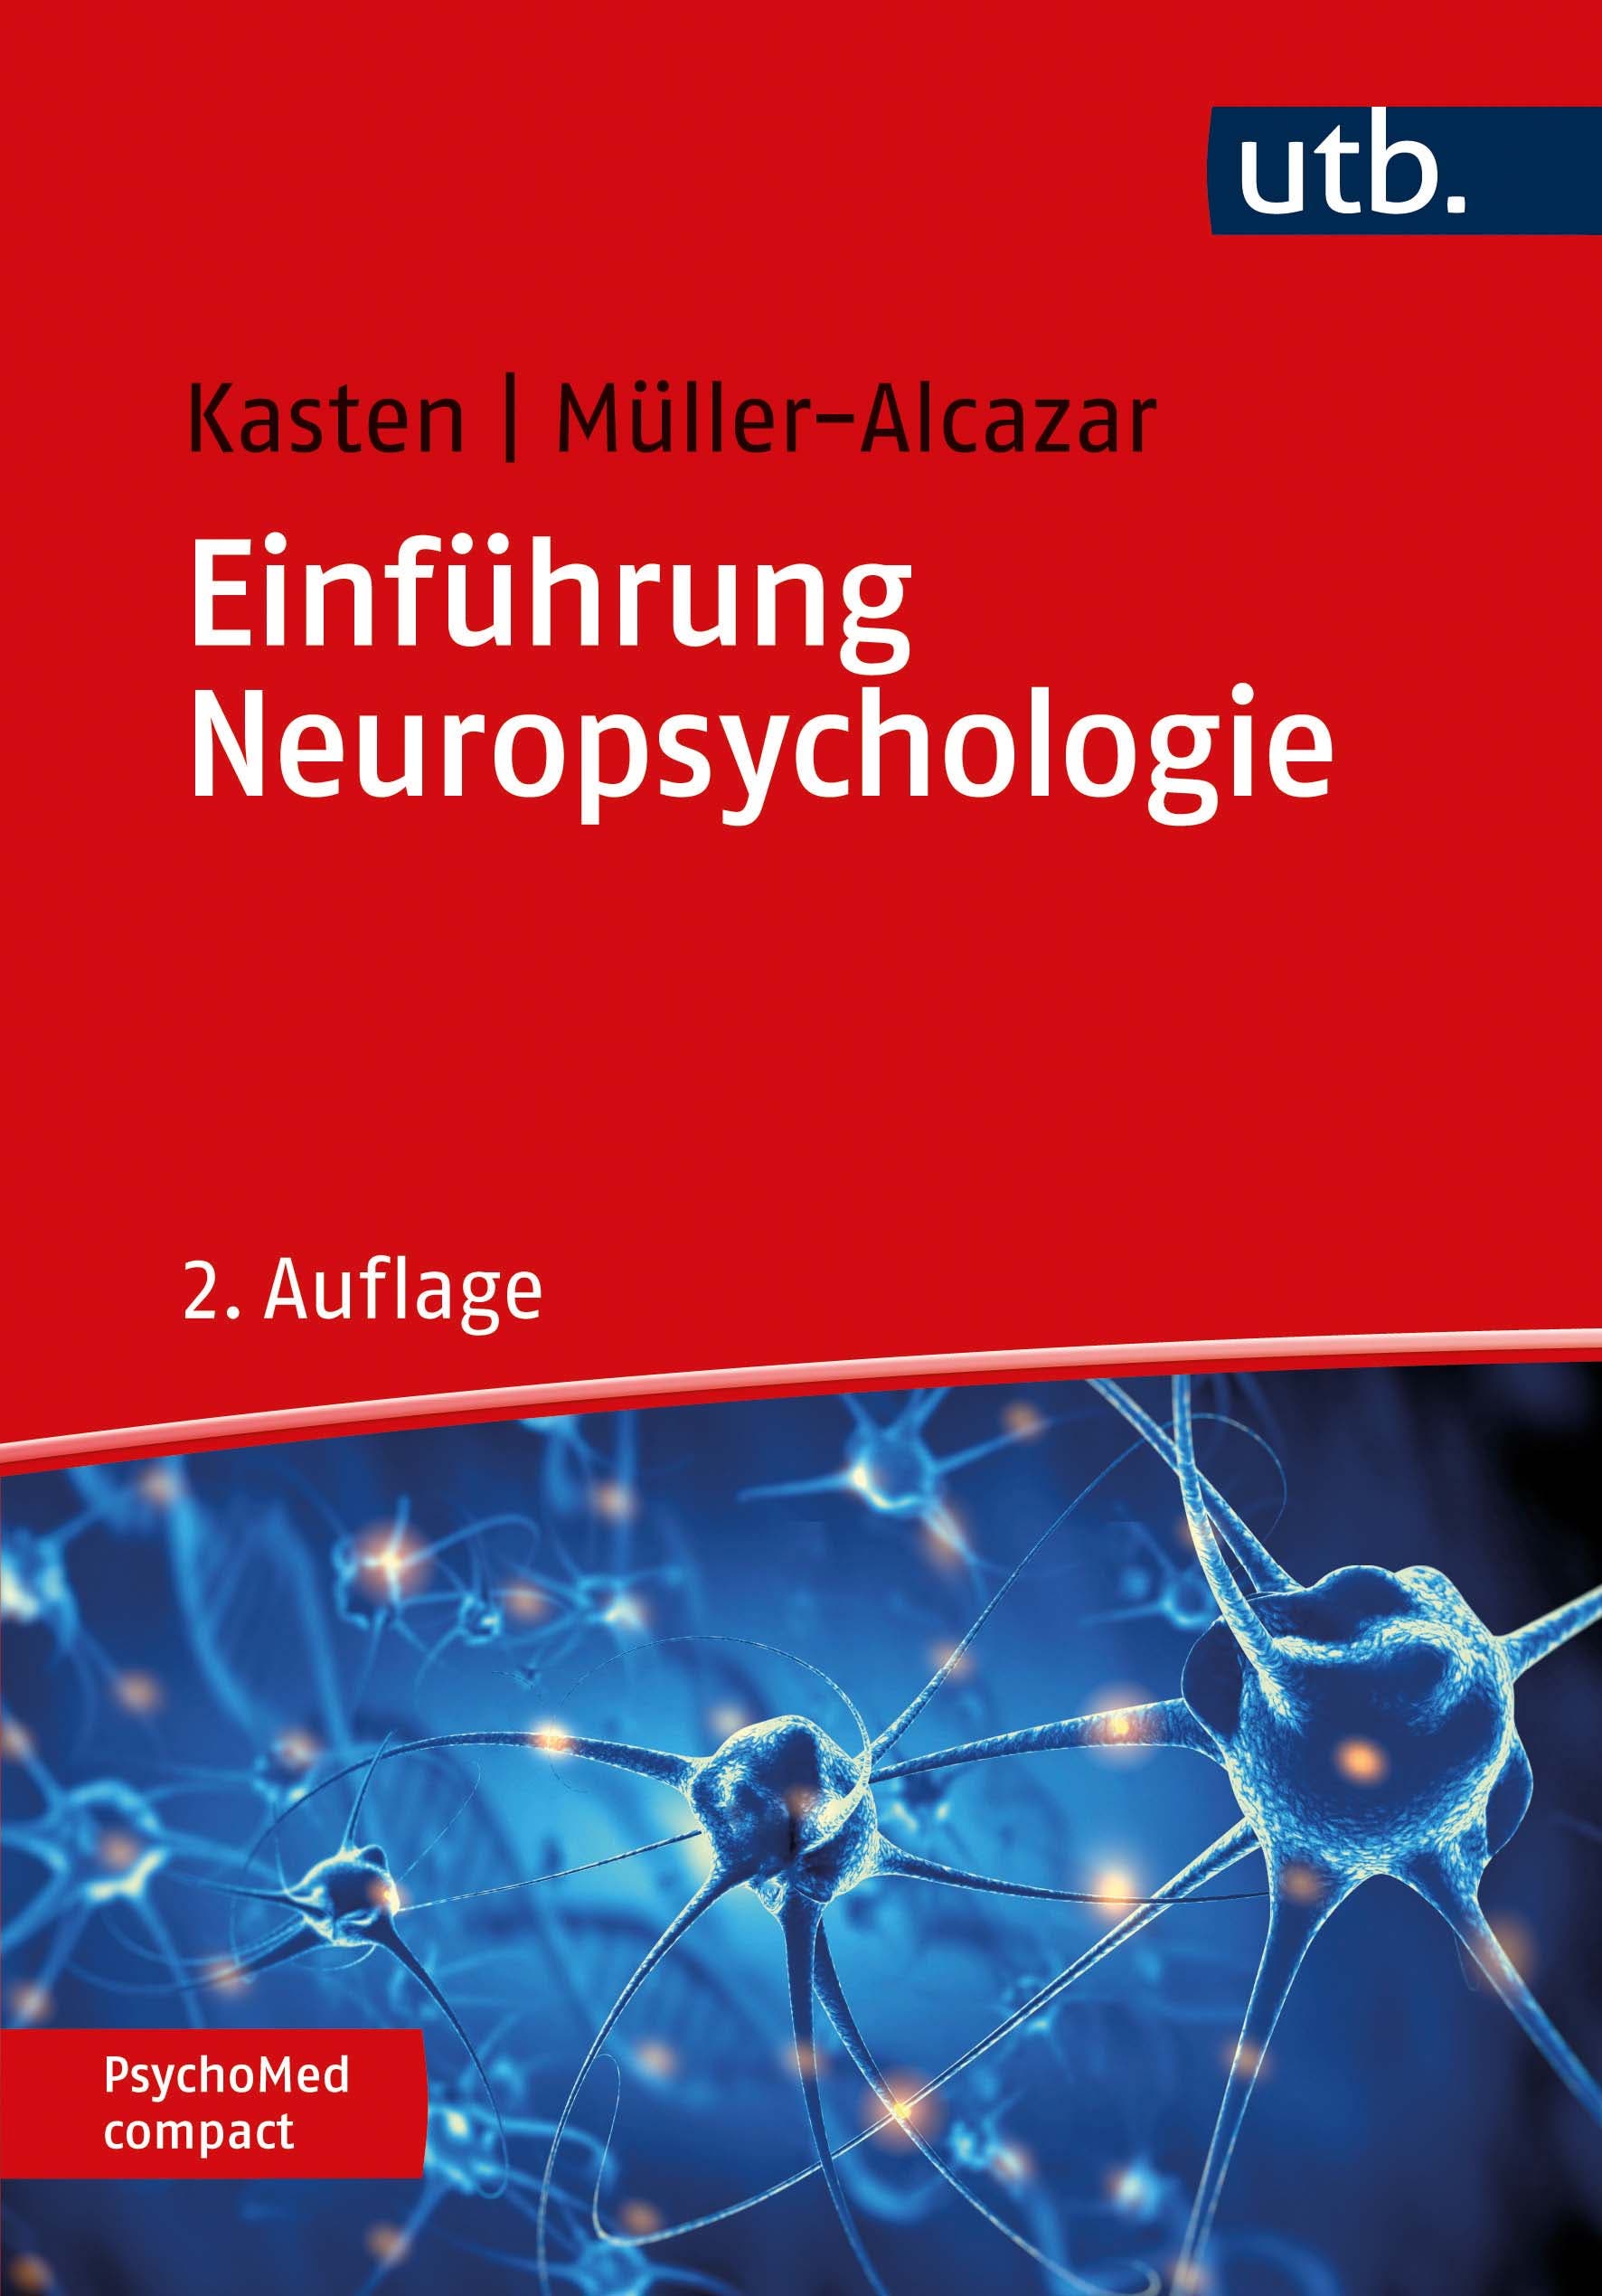 Review of the book “Introduction to Neuropsychology” – Spectrum of Science